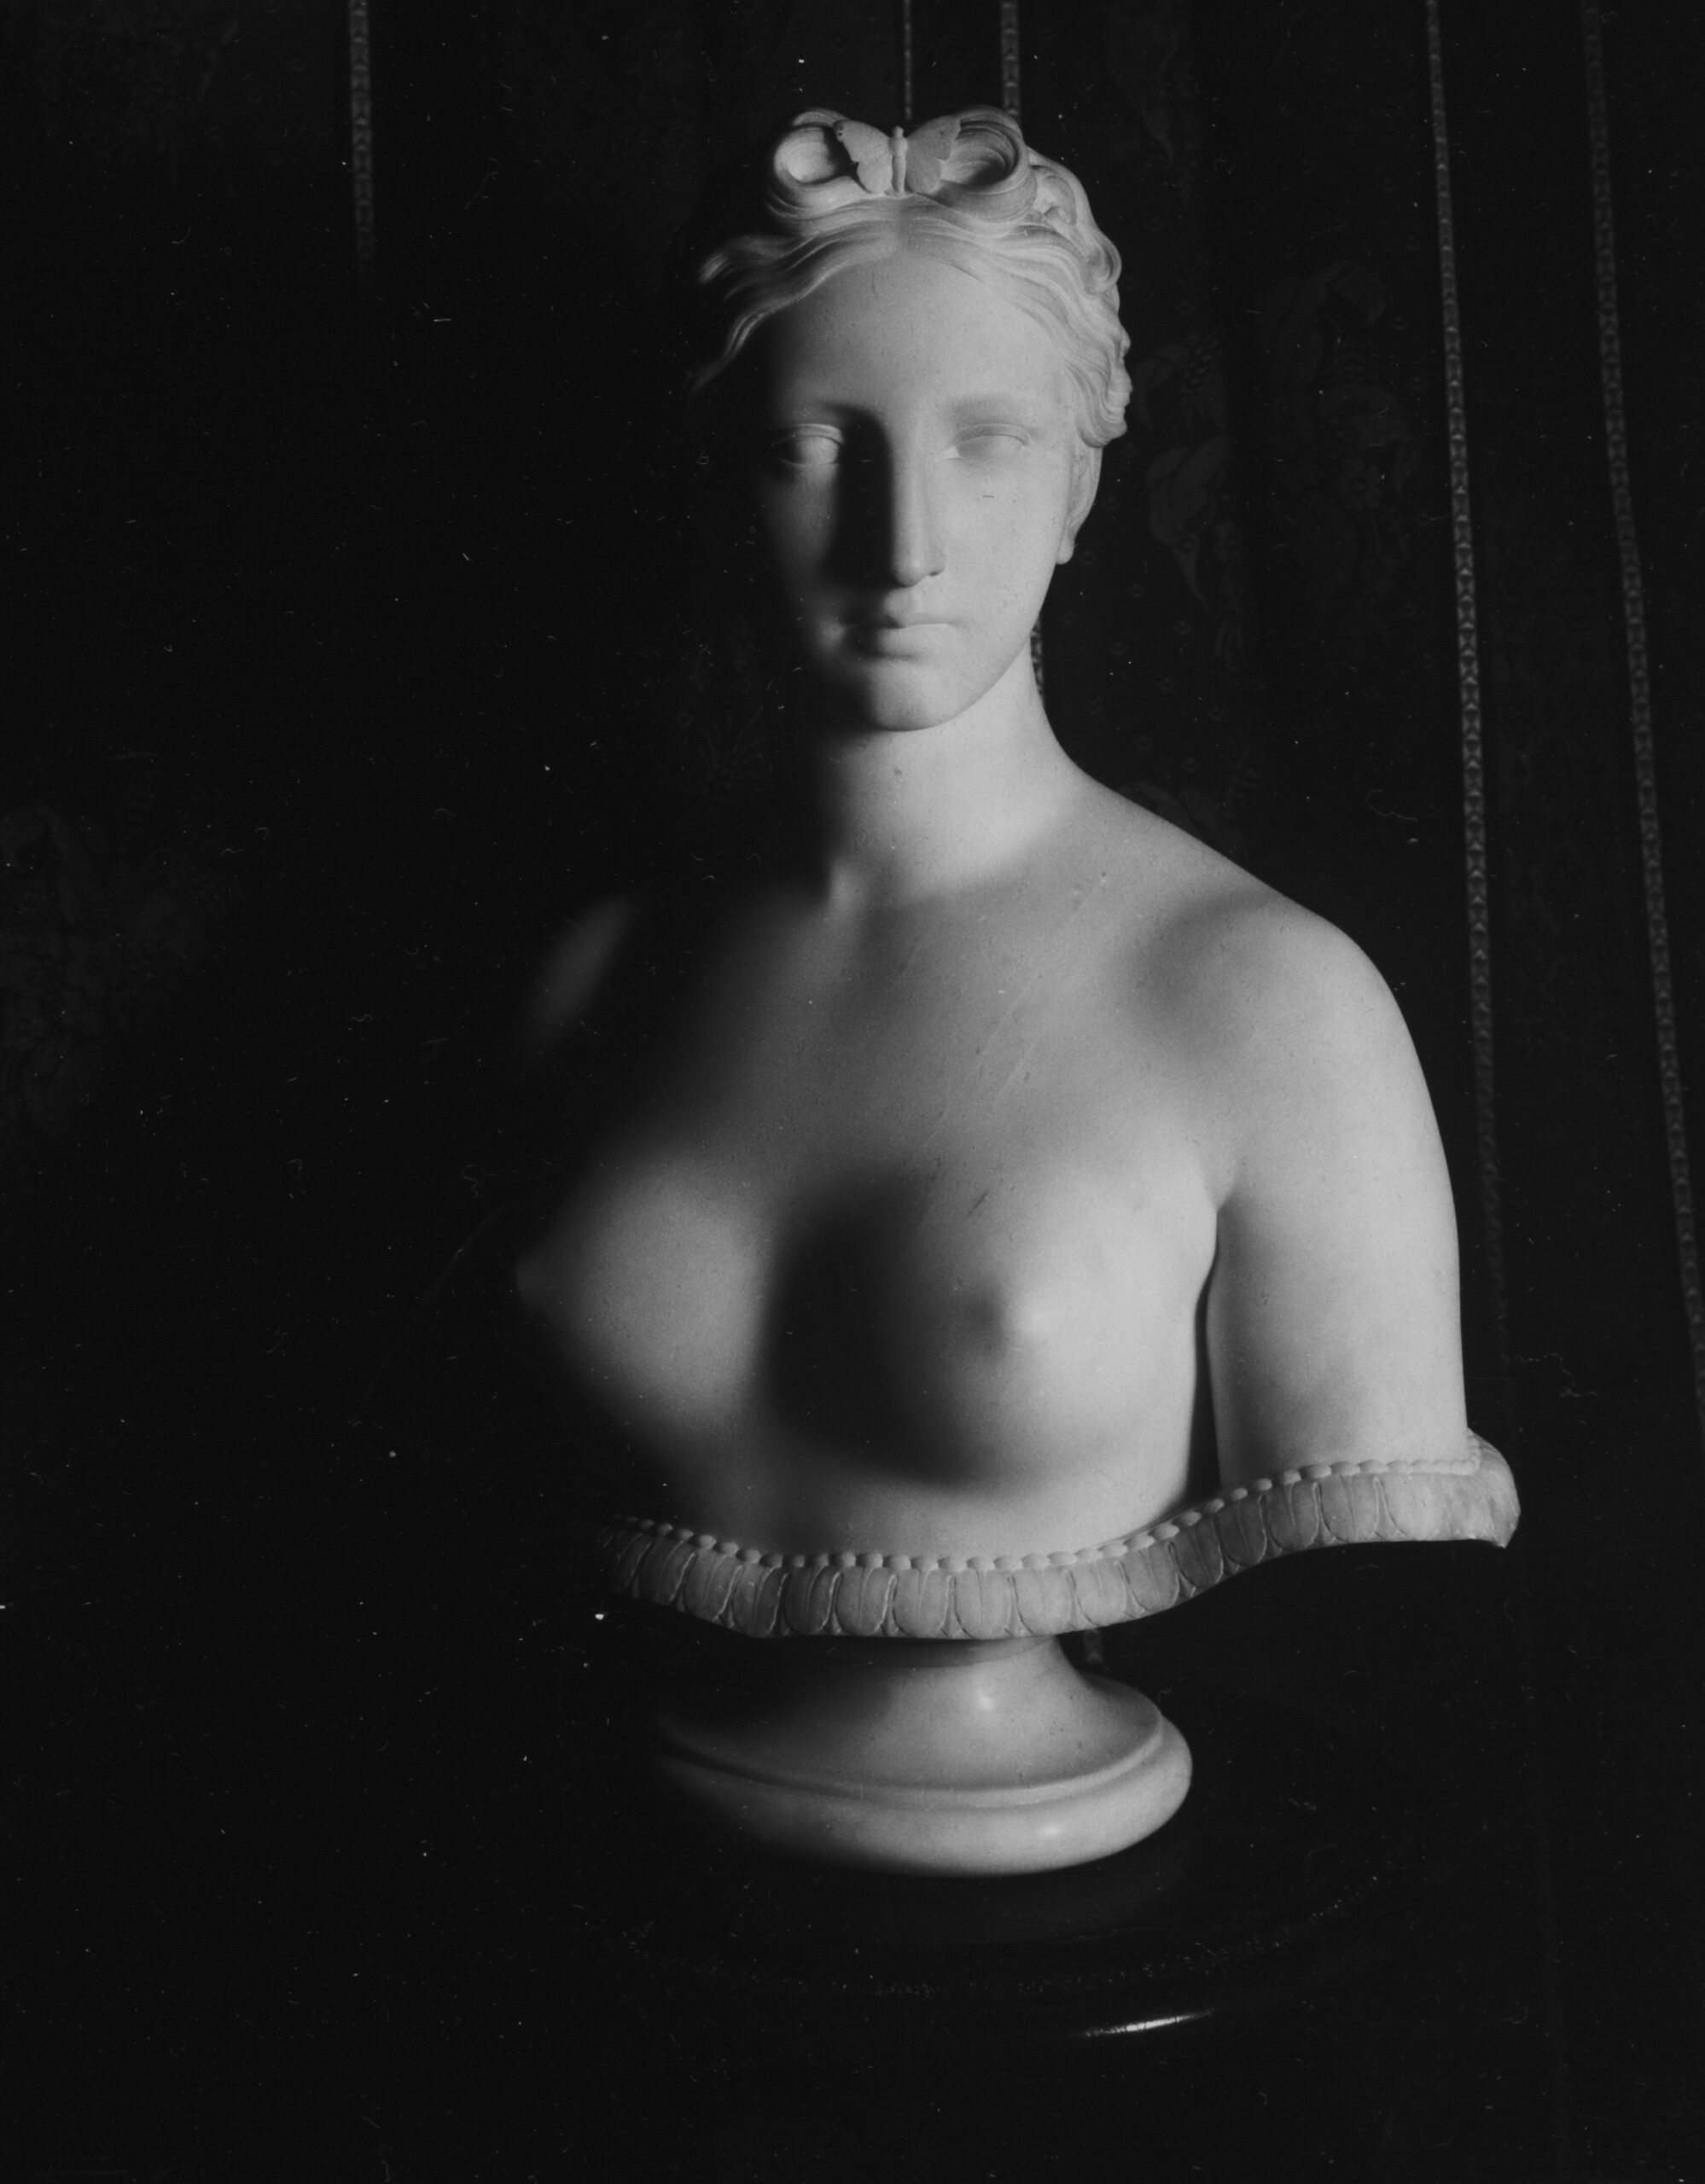 ID: A photograph of the Bust of Psyche. It is a marble statue depicting the bare bust of a slender woman with soft features and ringlets in her hair.